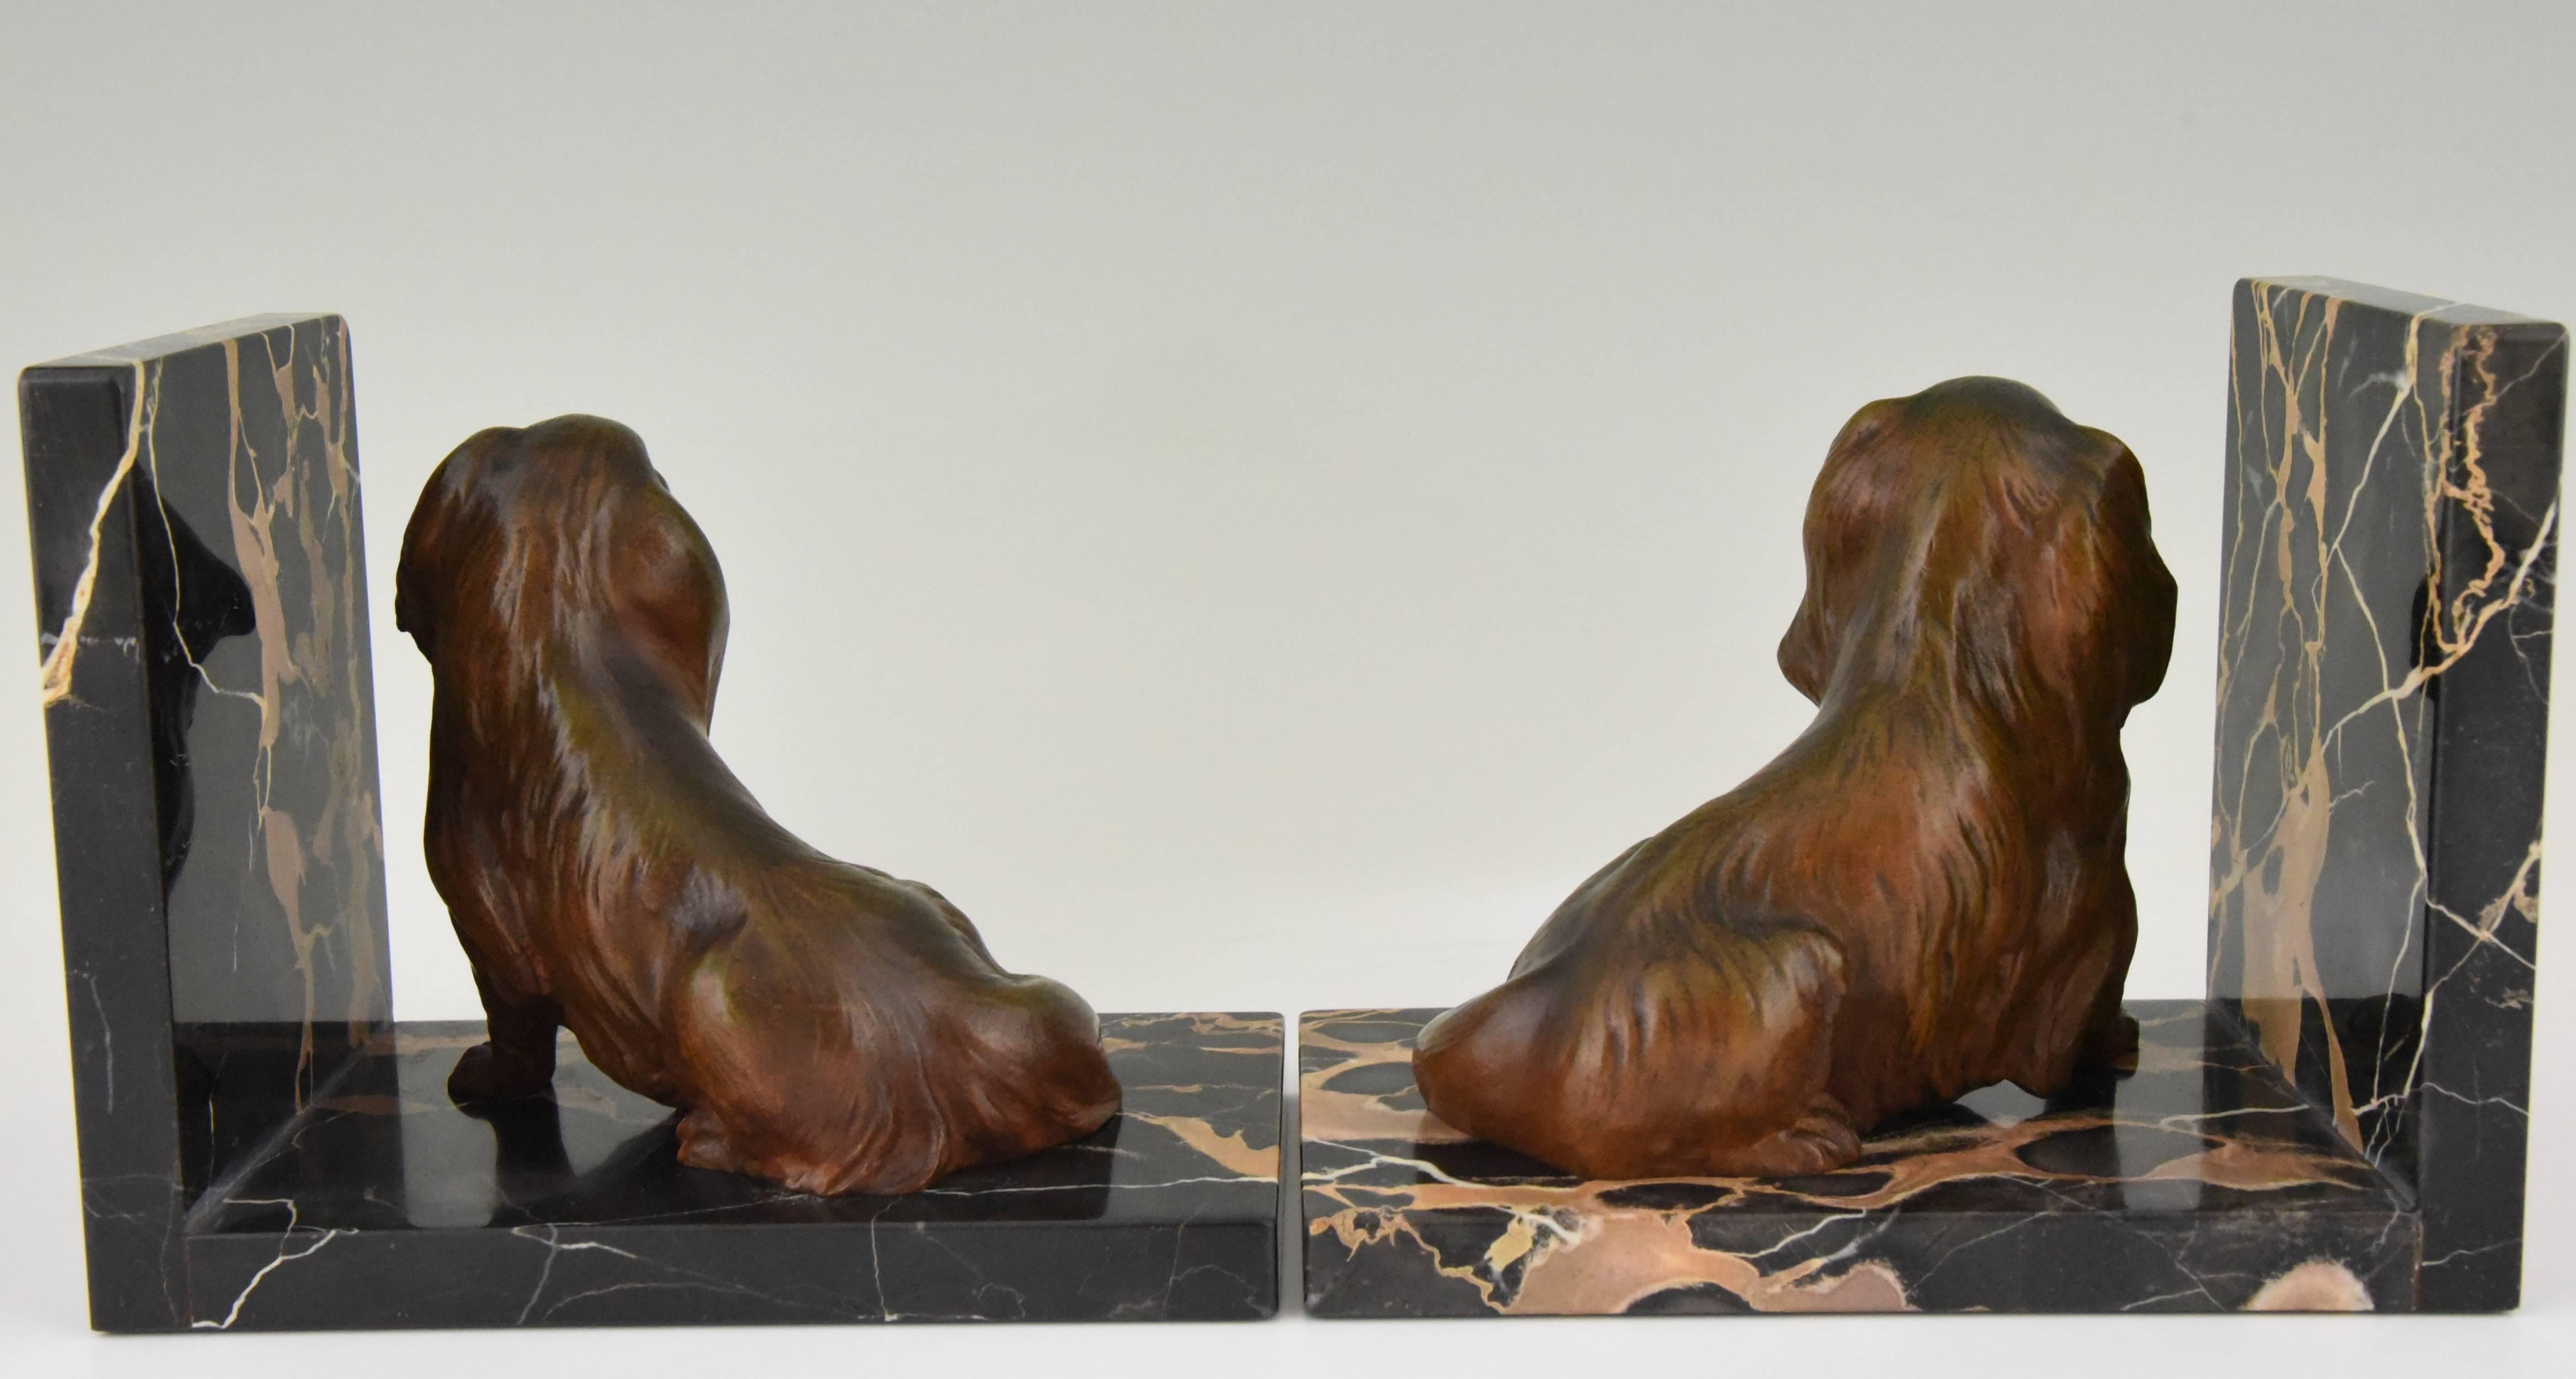 Lovely pair of Art Deco bronze Cavalier King Carles spaniel dog bookends by the French artist Louis Albert Carvin on Portor marble base. 

Artist/ maker: Louis Albert Carvin
Signature/ marks: L. Carvin
Style: Art Deco
Date: 1930
Material: